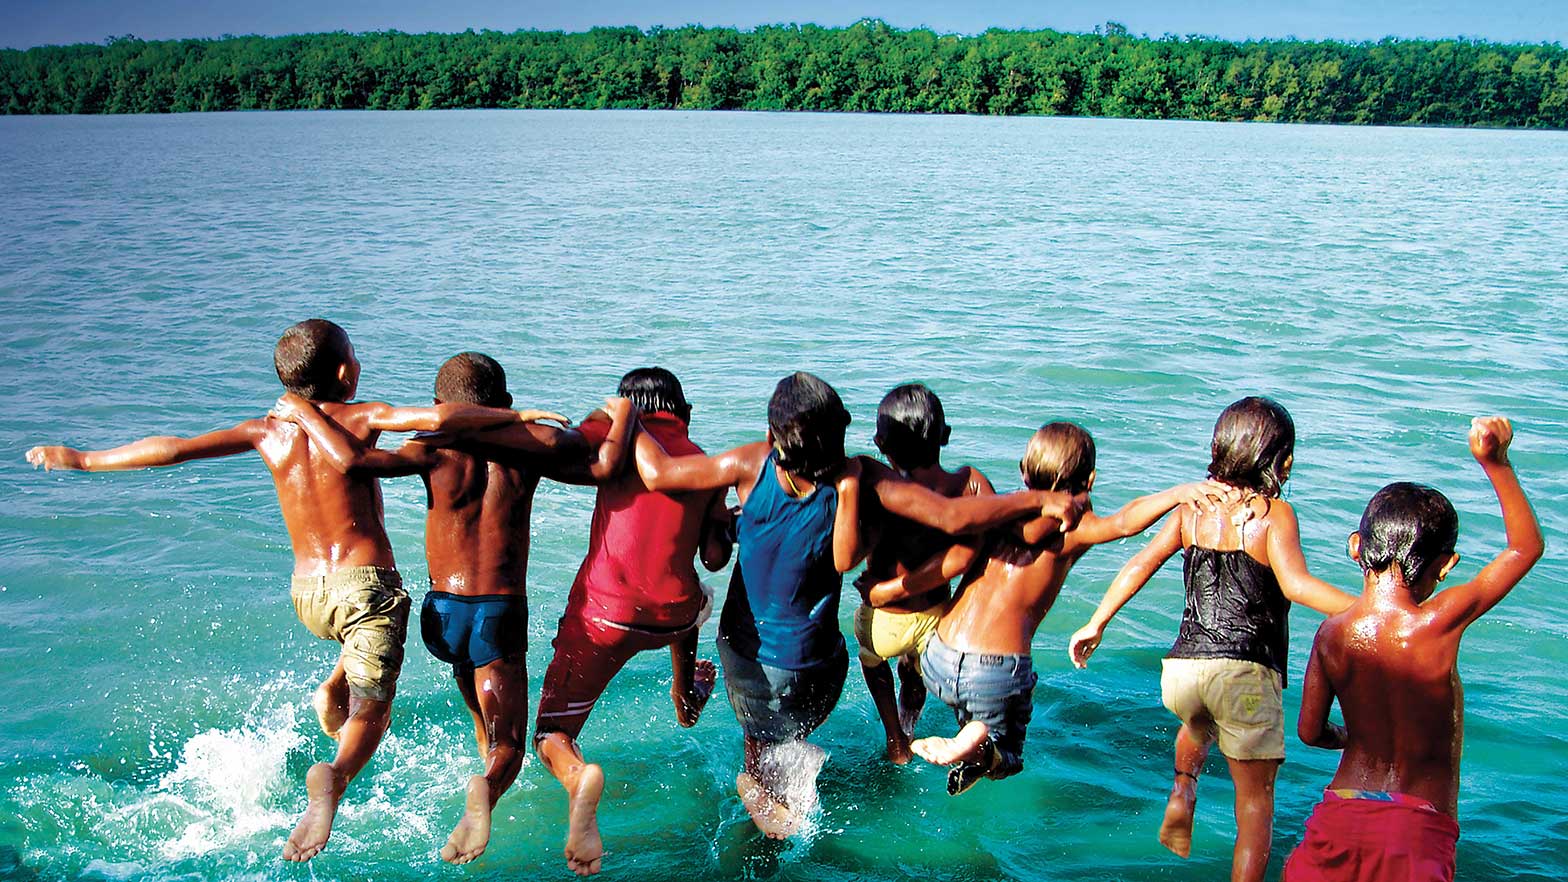 a group of children lock hands and jump into the water together